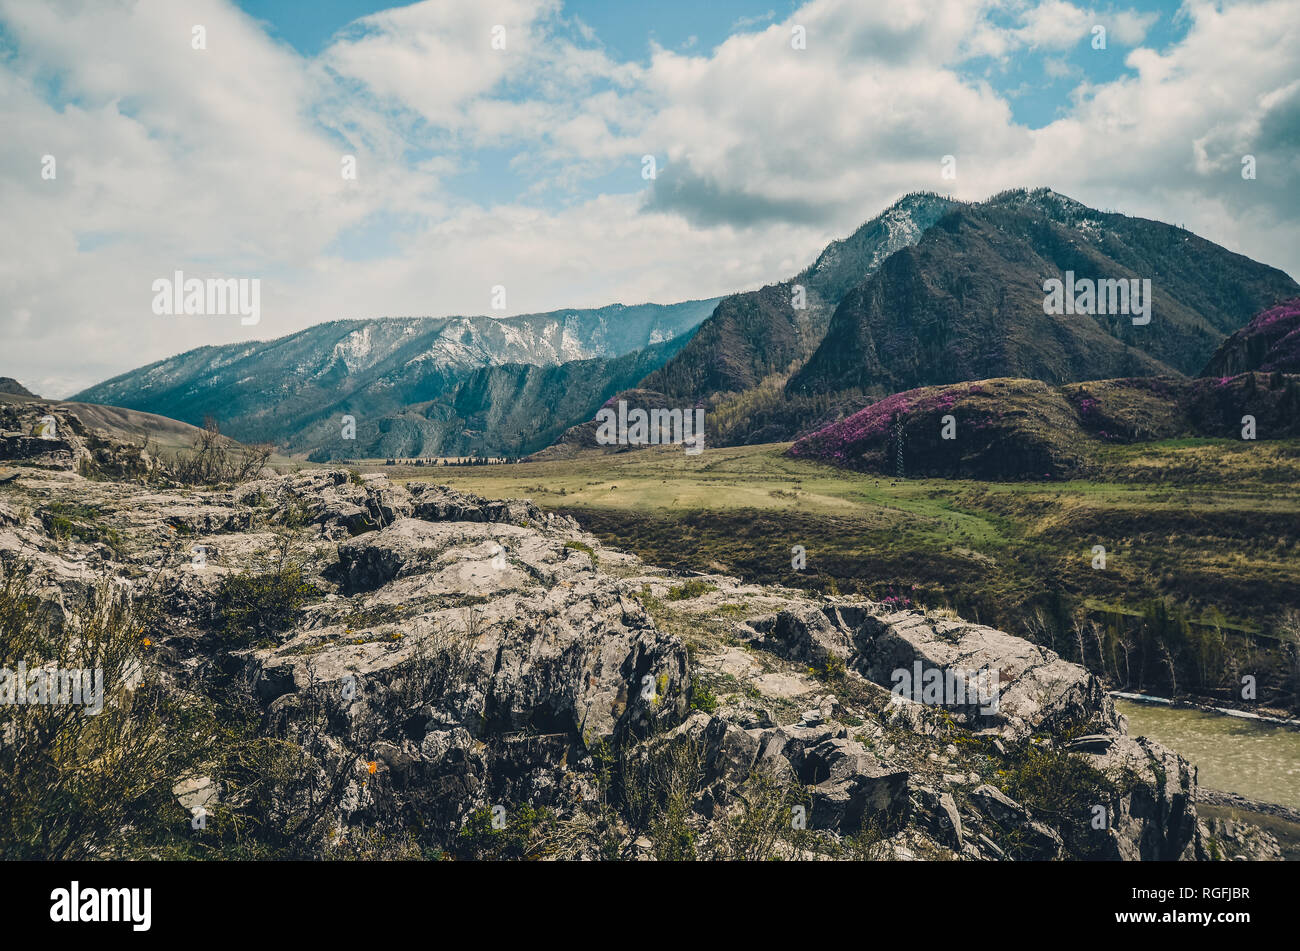 Mountain landscapes of Chui tract, Altai. Spring bloom in mountains Stock Photo